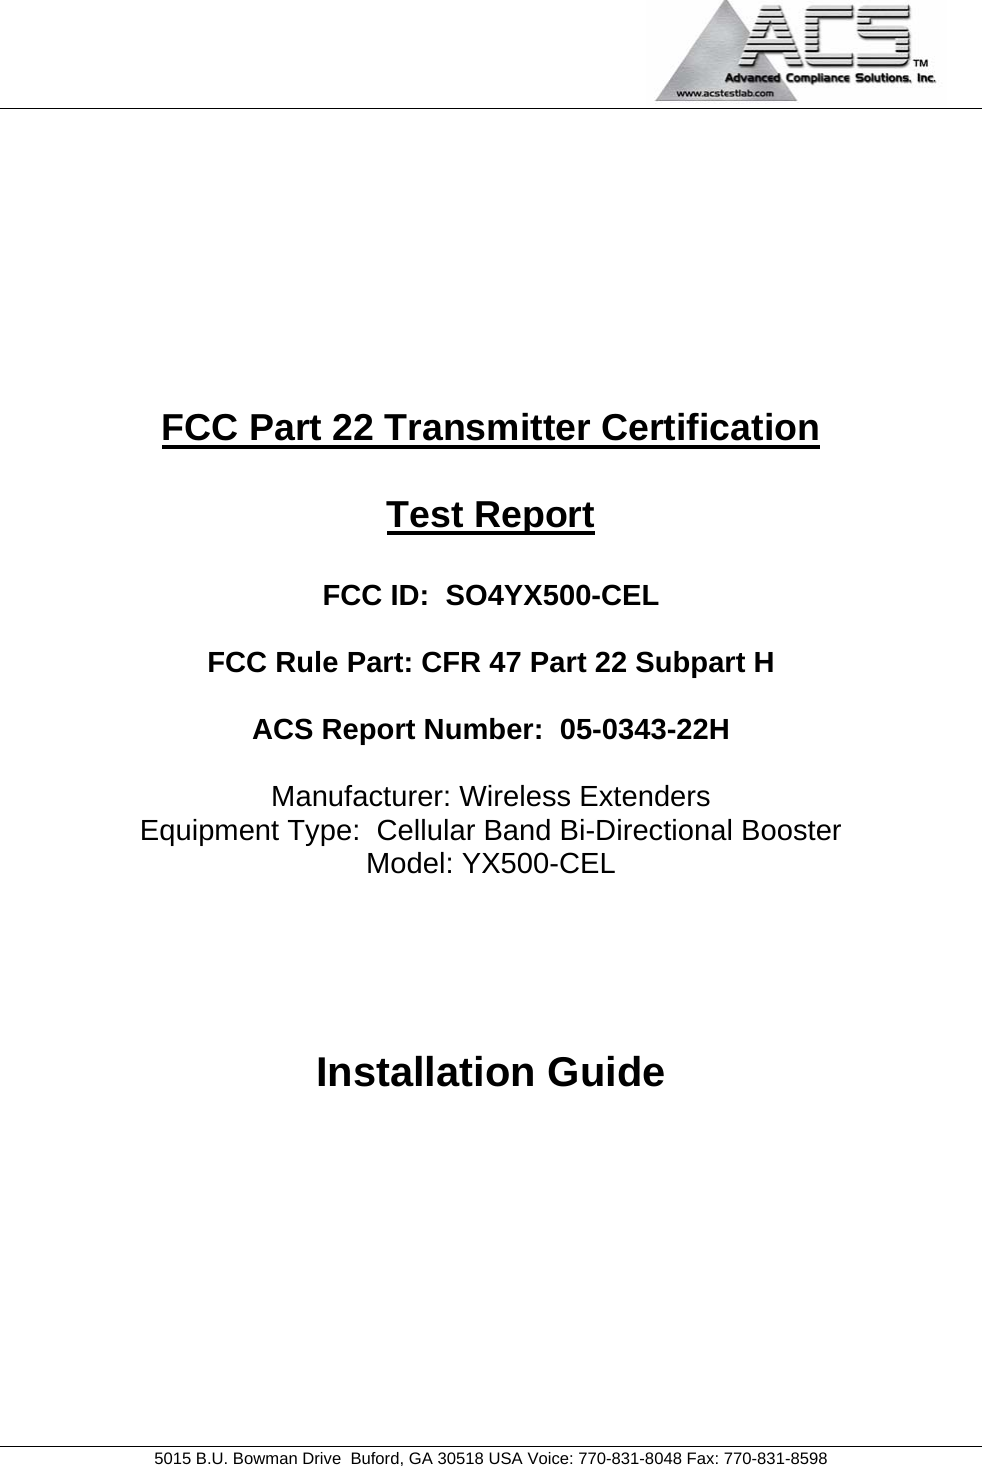                                            5015 B.U. Bowman Drive  Buford, GA 30518 USA Voice: 770-831-8048 Fax: 770-831-8598   FCC Part 22 Transmitter Certification  Test Report  FCC ID:  SO4YX500-CEL  FCC Rule Part: CFR 47 Part 22 Subpart H  ACS Report Number:  05-0343-22H   Manufacturer: Wireless Extenders Equipment Type:  Cellular Band Bi-Directional Booster Model: YX500-CEL     Installation Guide  